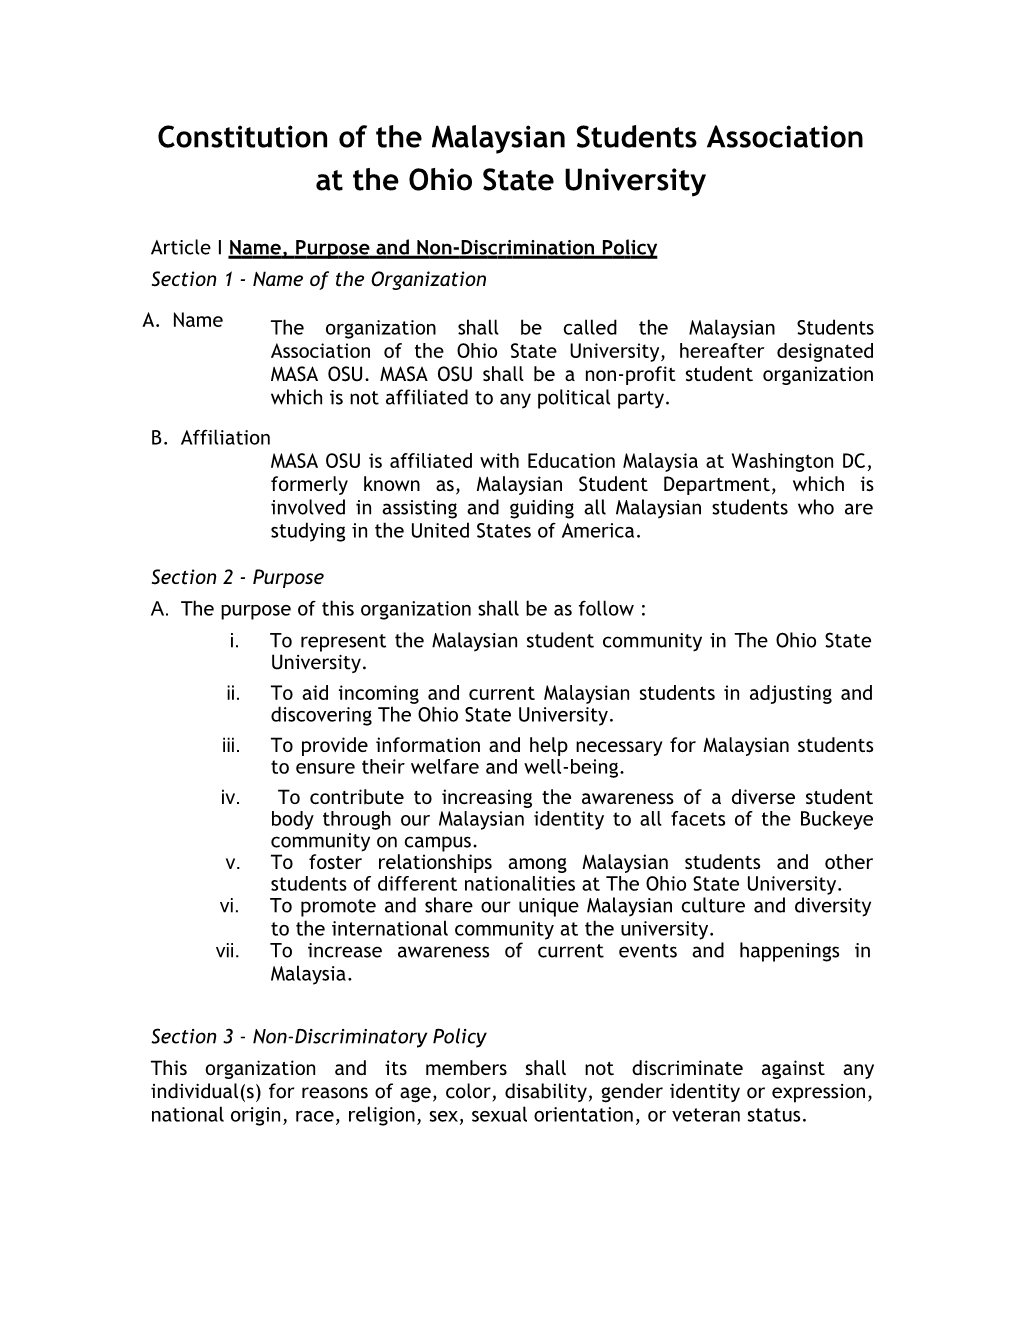 Constitution of the Malaysian Students Association Atthe Ohio Stateuniversity